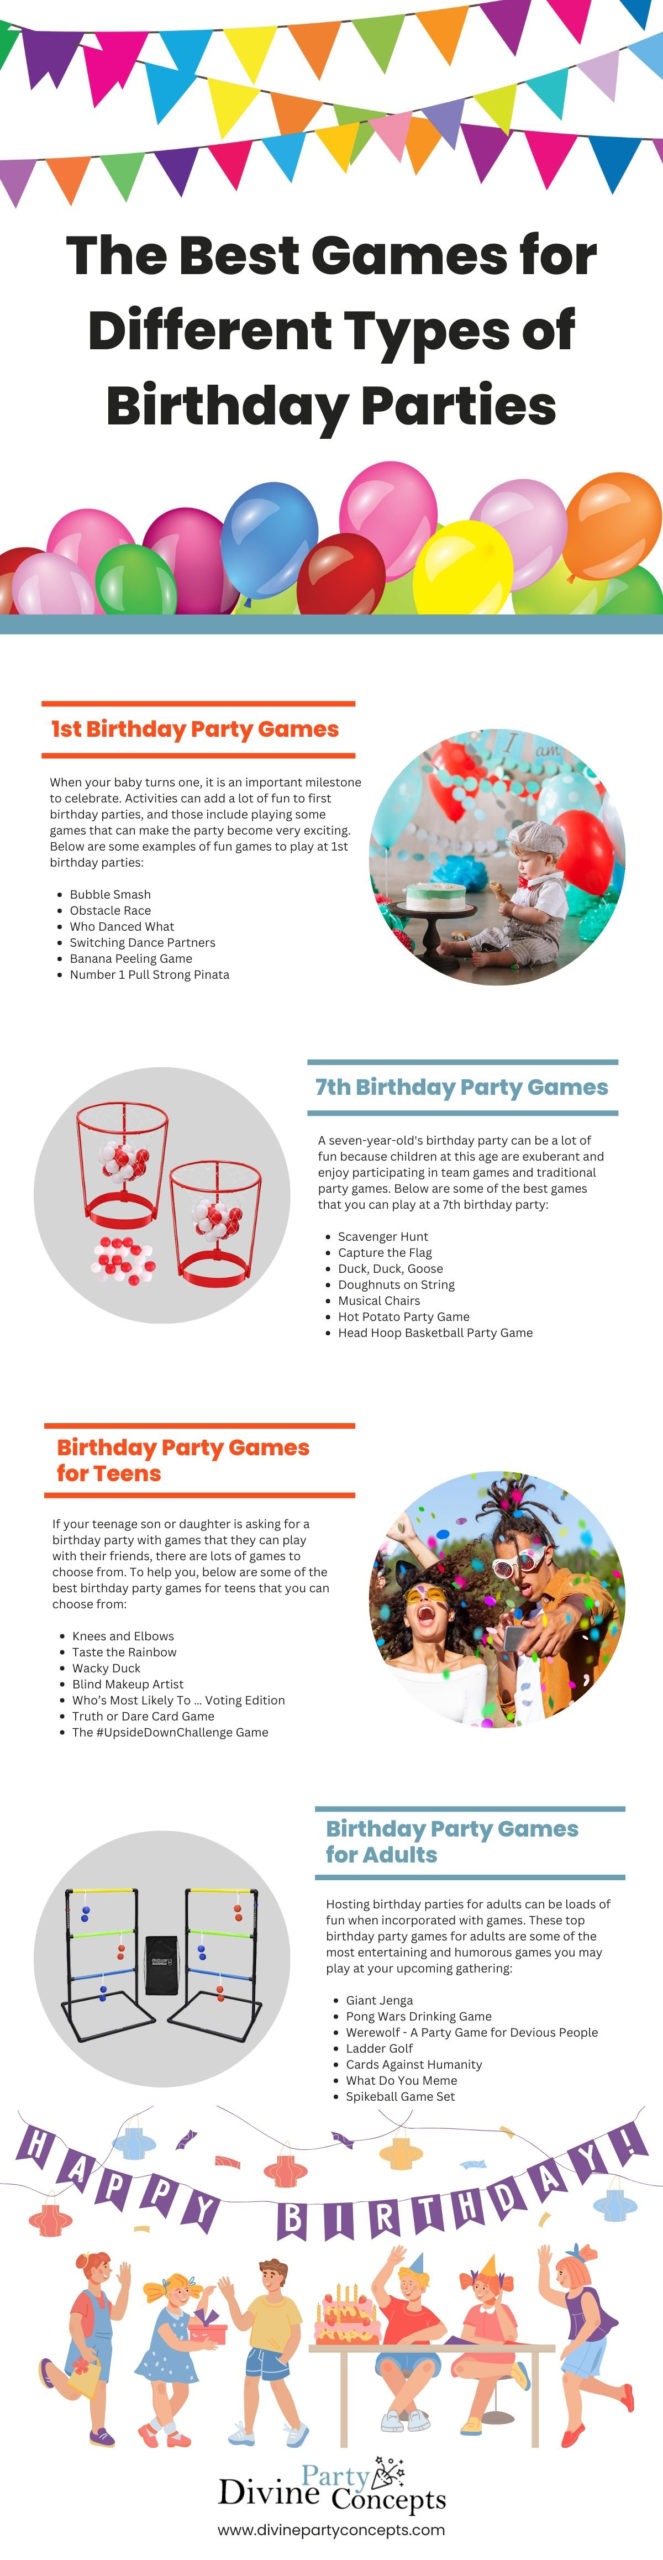 The-Best-Games-for-Different-Types-of-Birthday-Parties